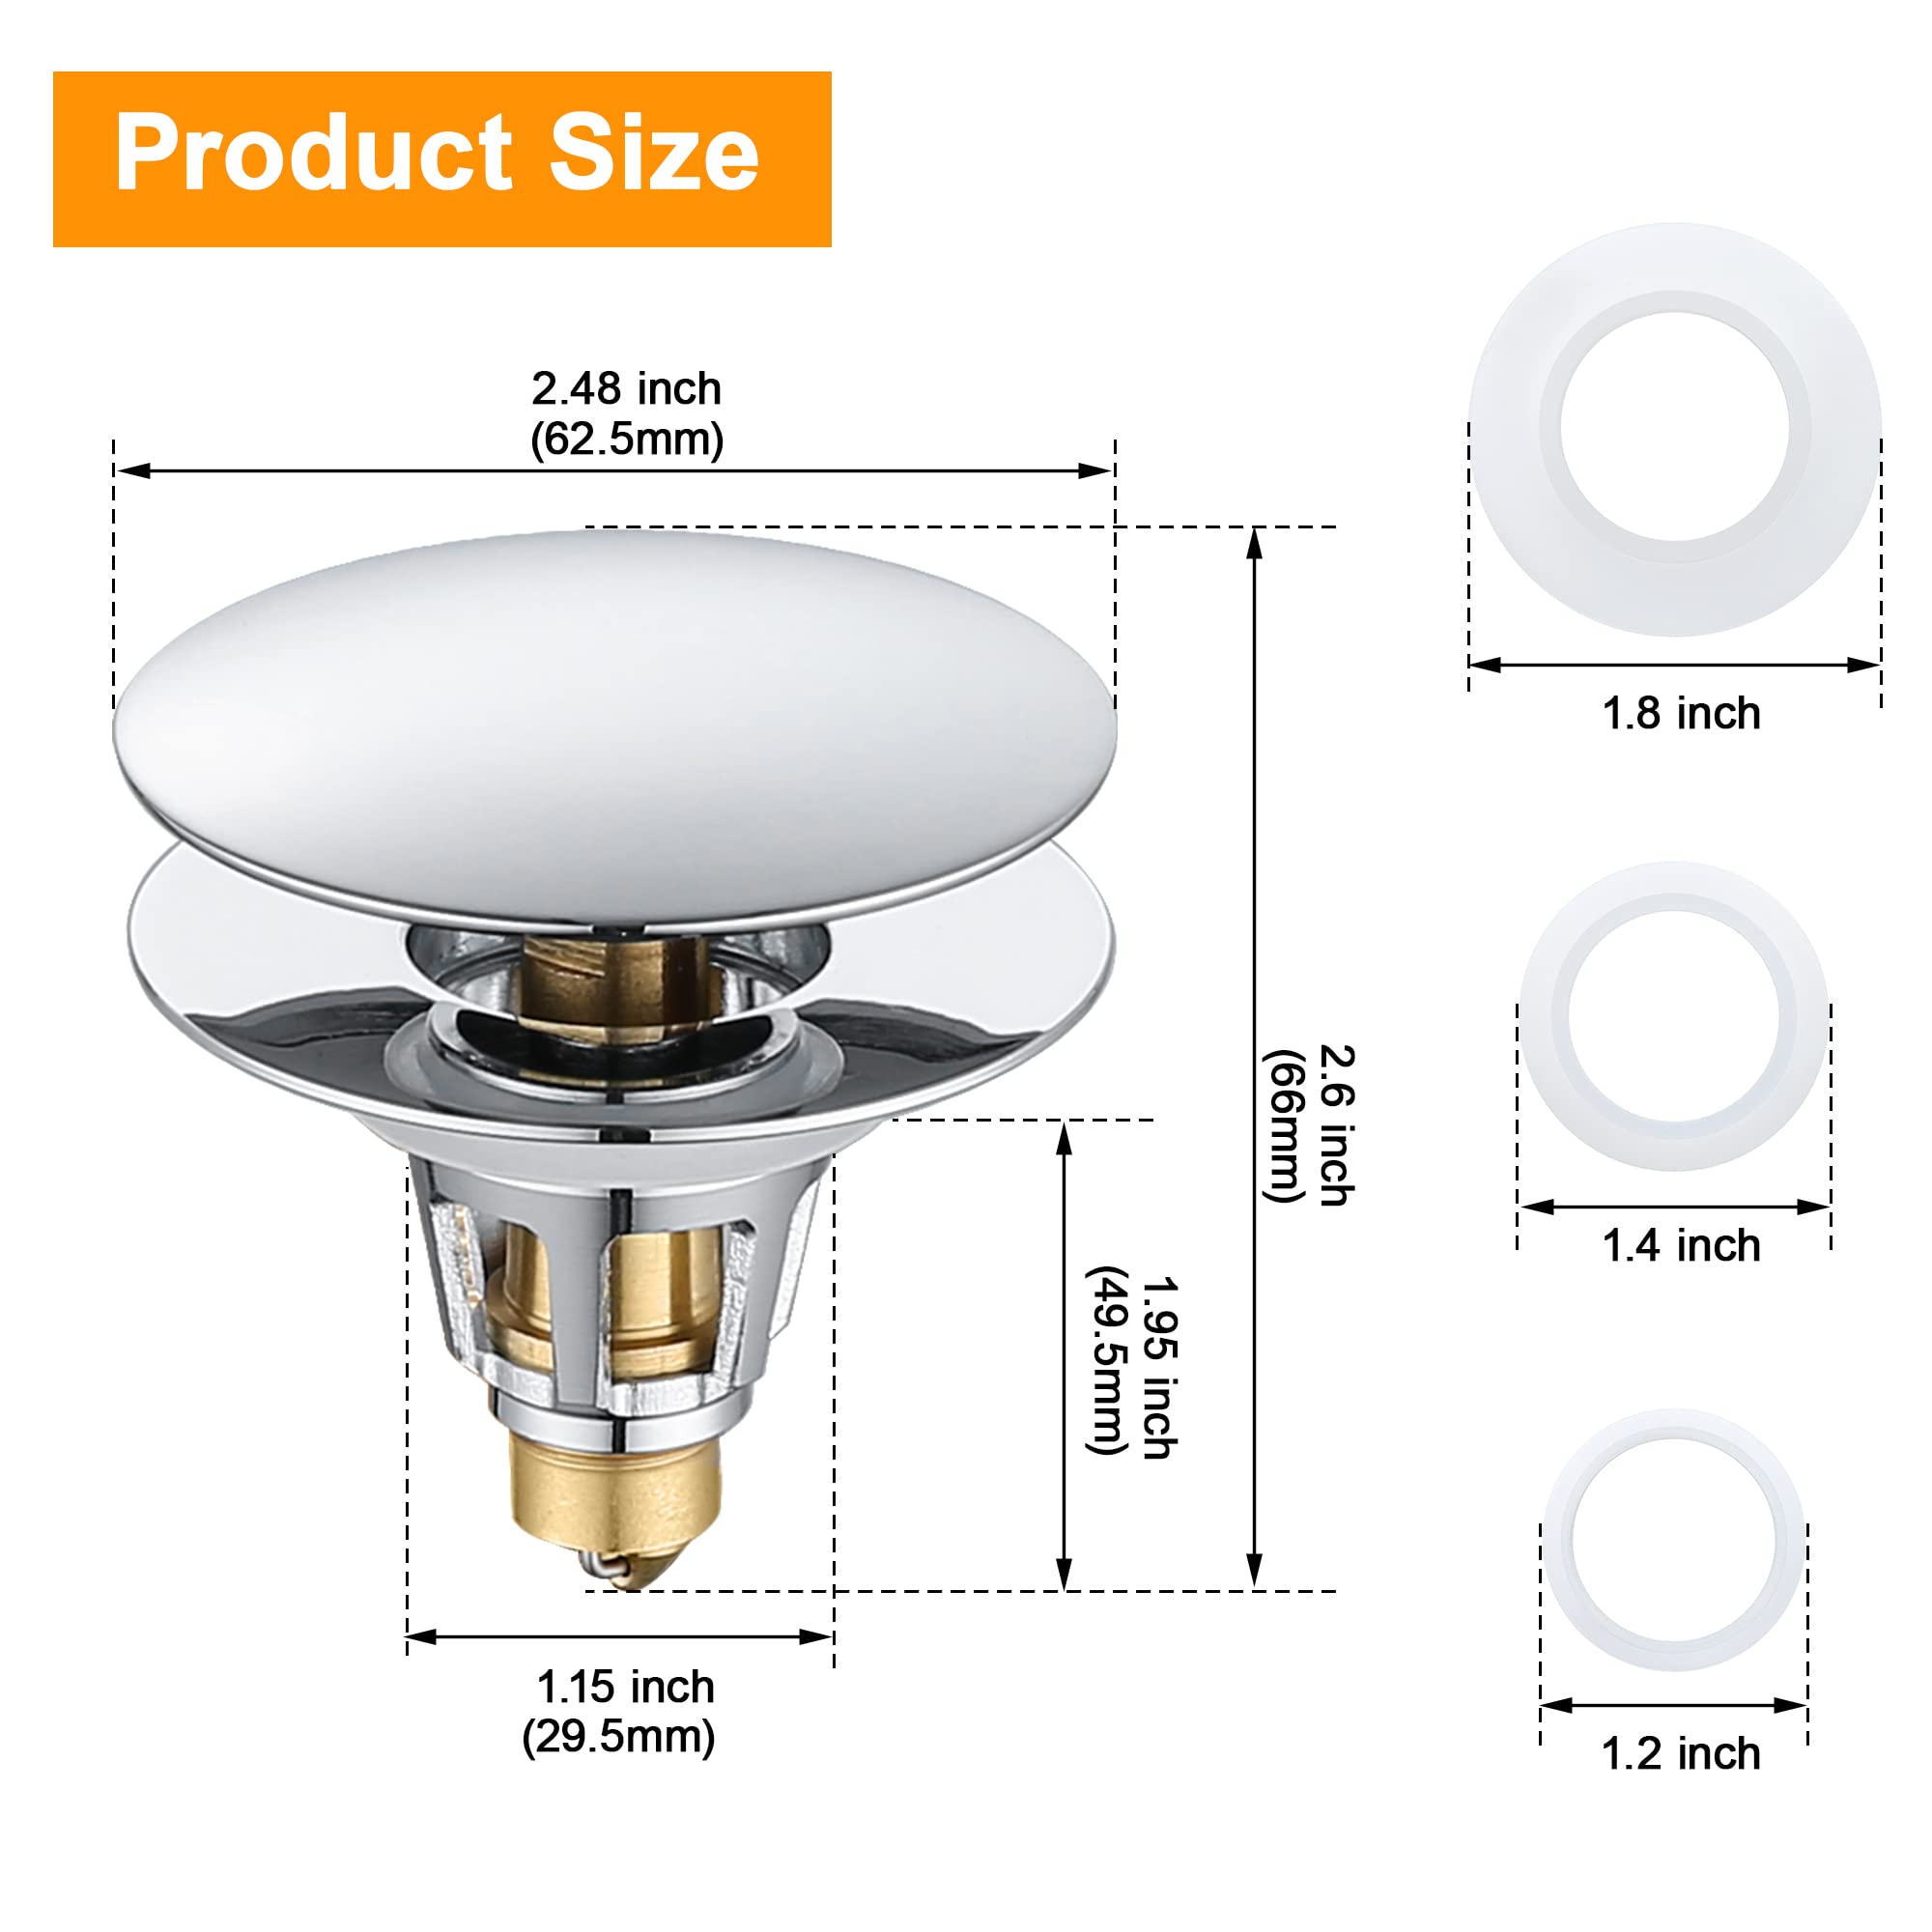 𝐓𝐈𝐎𝐑𝐈𝐘 Universal Bathroom Sink Stopper - 1.1~1.5" Sink Drain Stopper, Full-Size Bounce Bullet Type Pop Up Basin Drain Strainer, Chrome Anti-Clogging Sink Drain Filter with Hair Catcher (Silver)